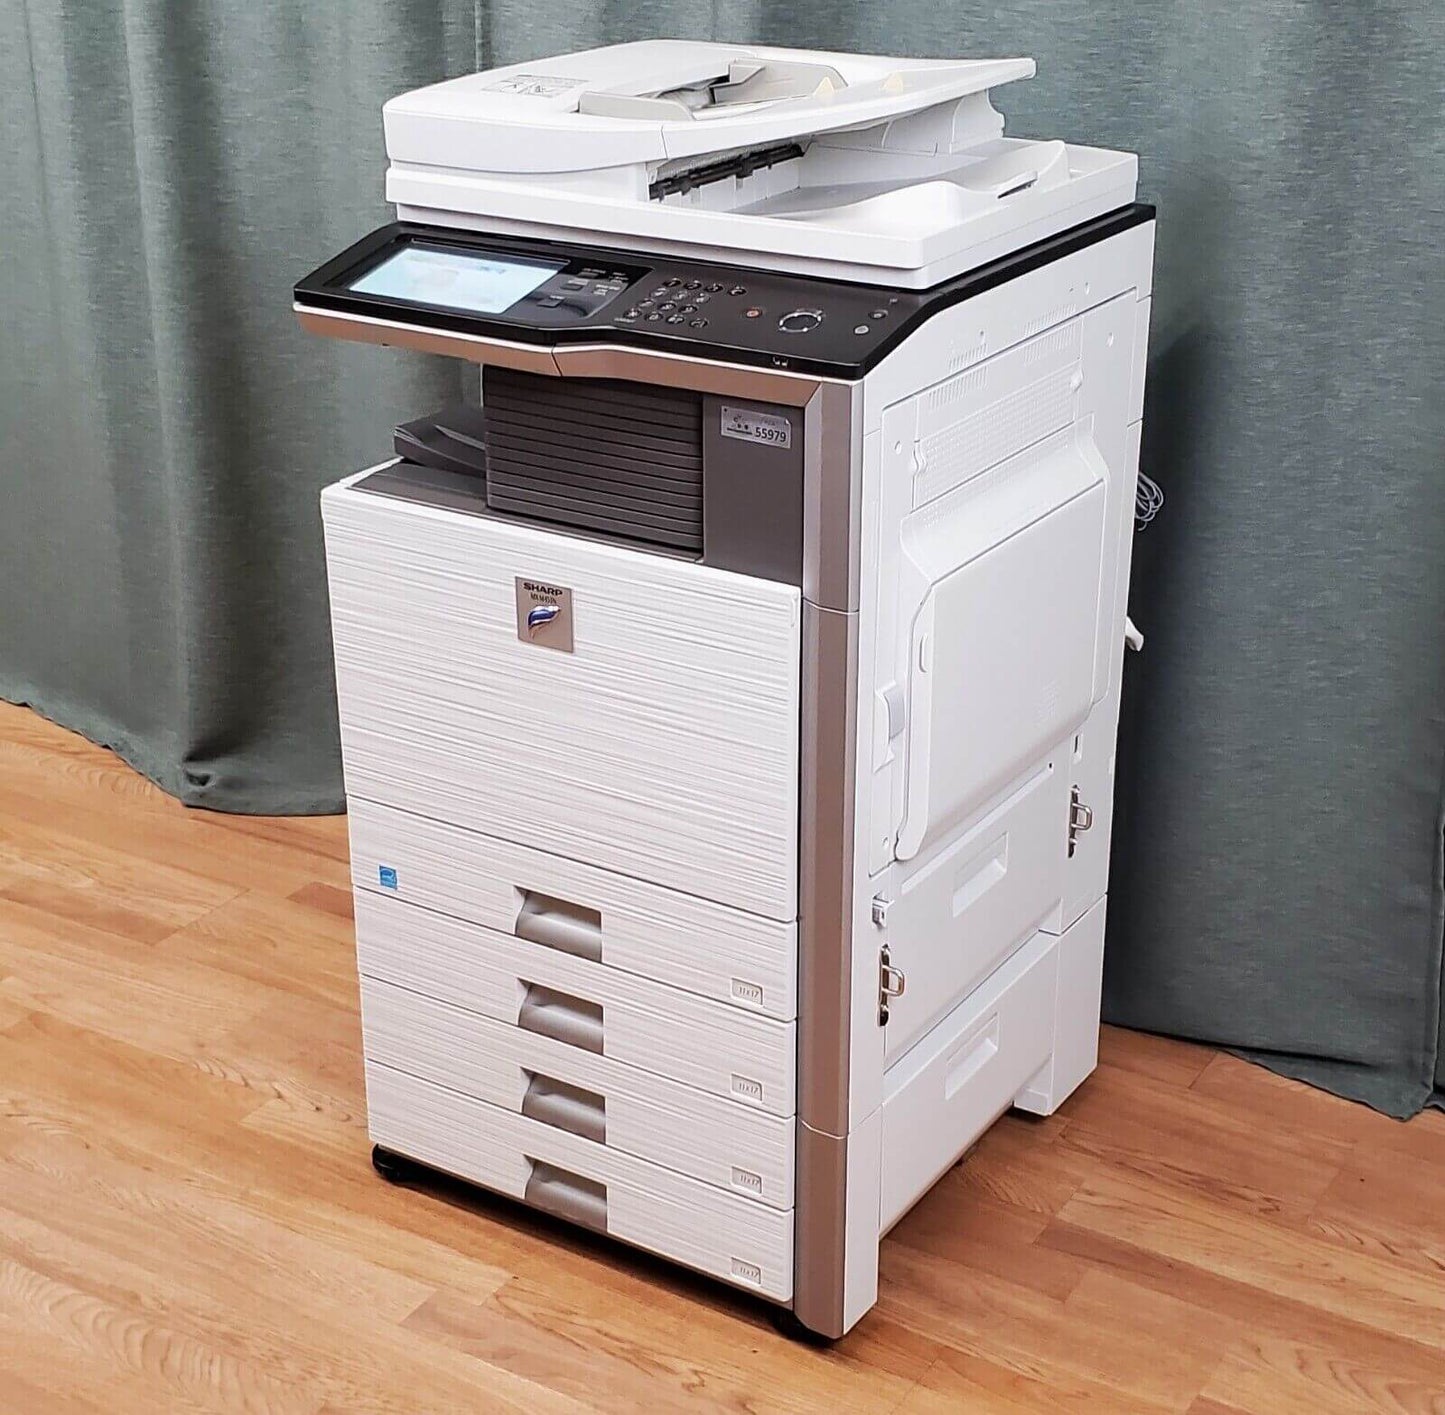 Sharp MX-M453N Black and White Copier Printer Scanner Fax Network Very Low 62k!! - copier-clearance-center